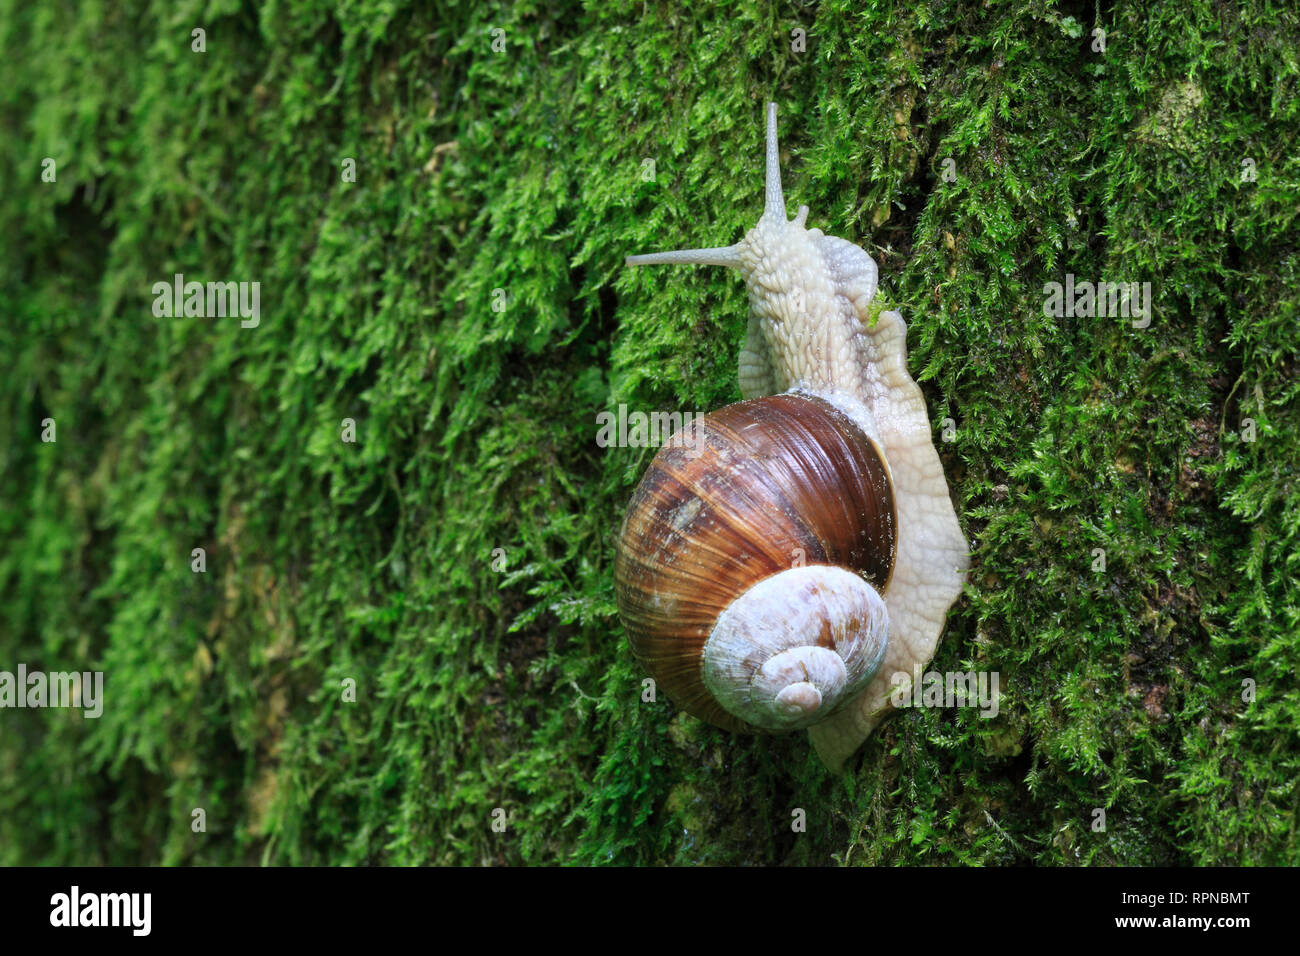 Zoologie/Tiere, Weichtiere (Mollusca), Weinbergschnecke, Helix pomatia, escargot, Schweiz, Additional-Rights - Clearance-Info - Not-Available Stockfoto